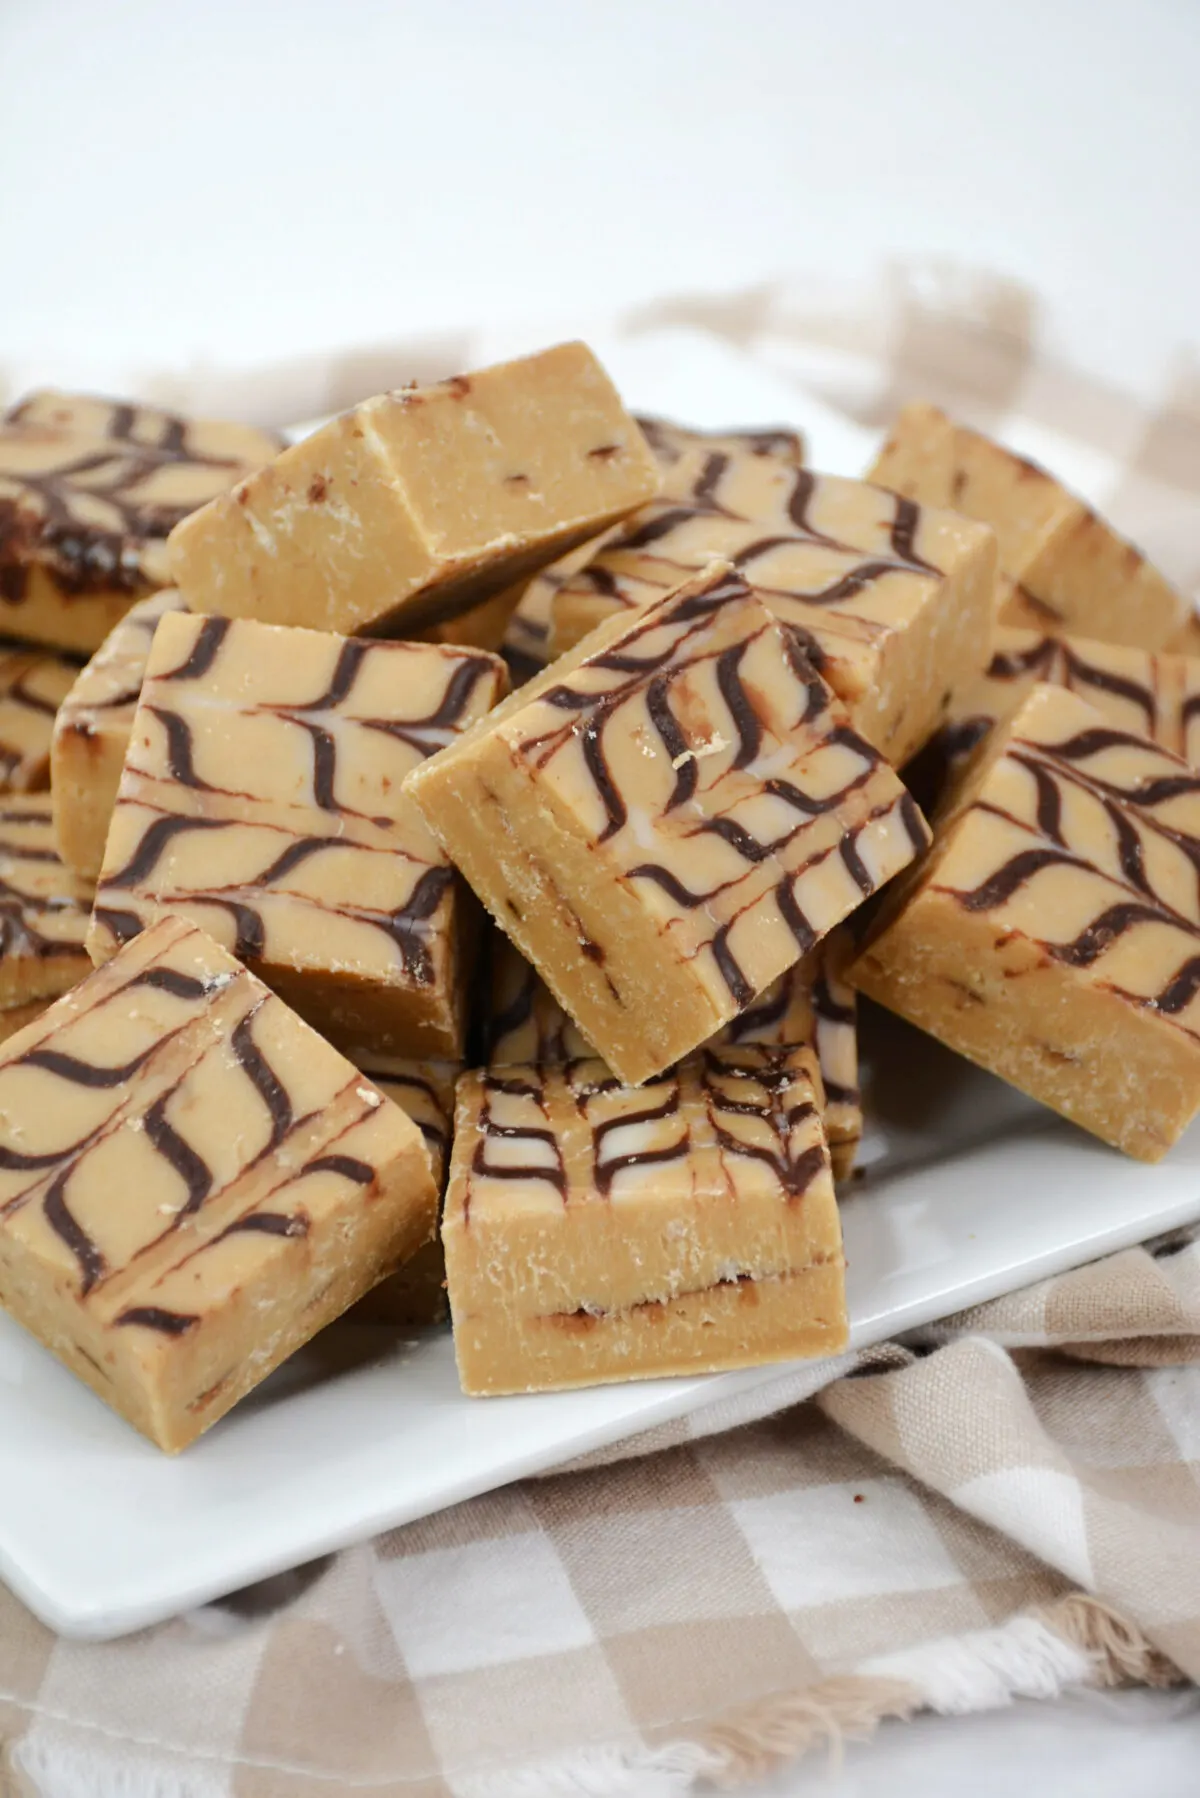 Whip up a batch of indulgent mocha rum fudge with this simple recipe. Perfect for any occasion, this treat is sure to impress!